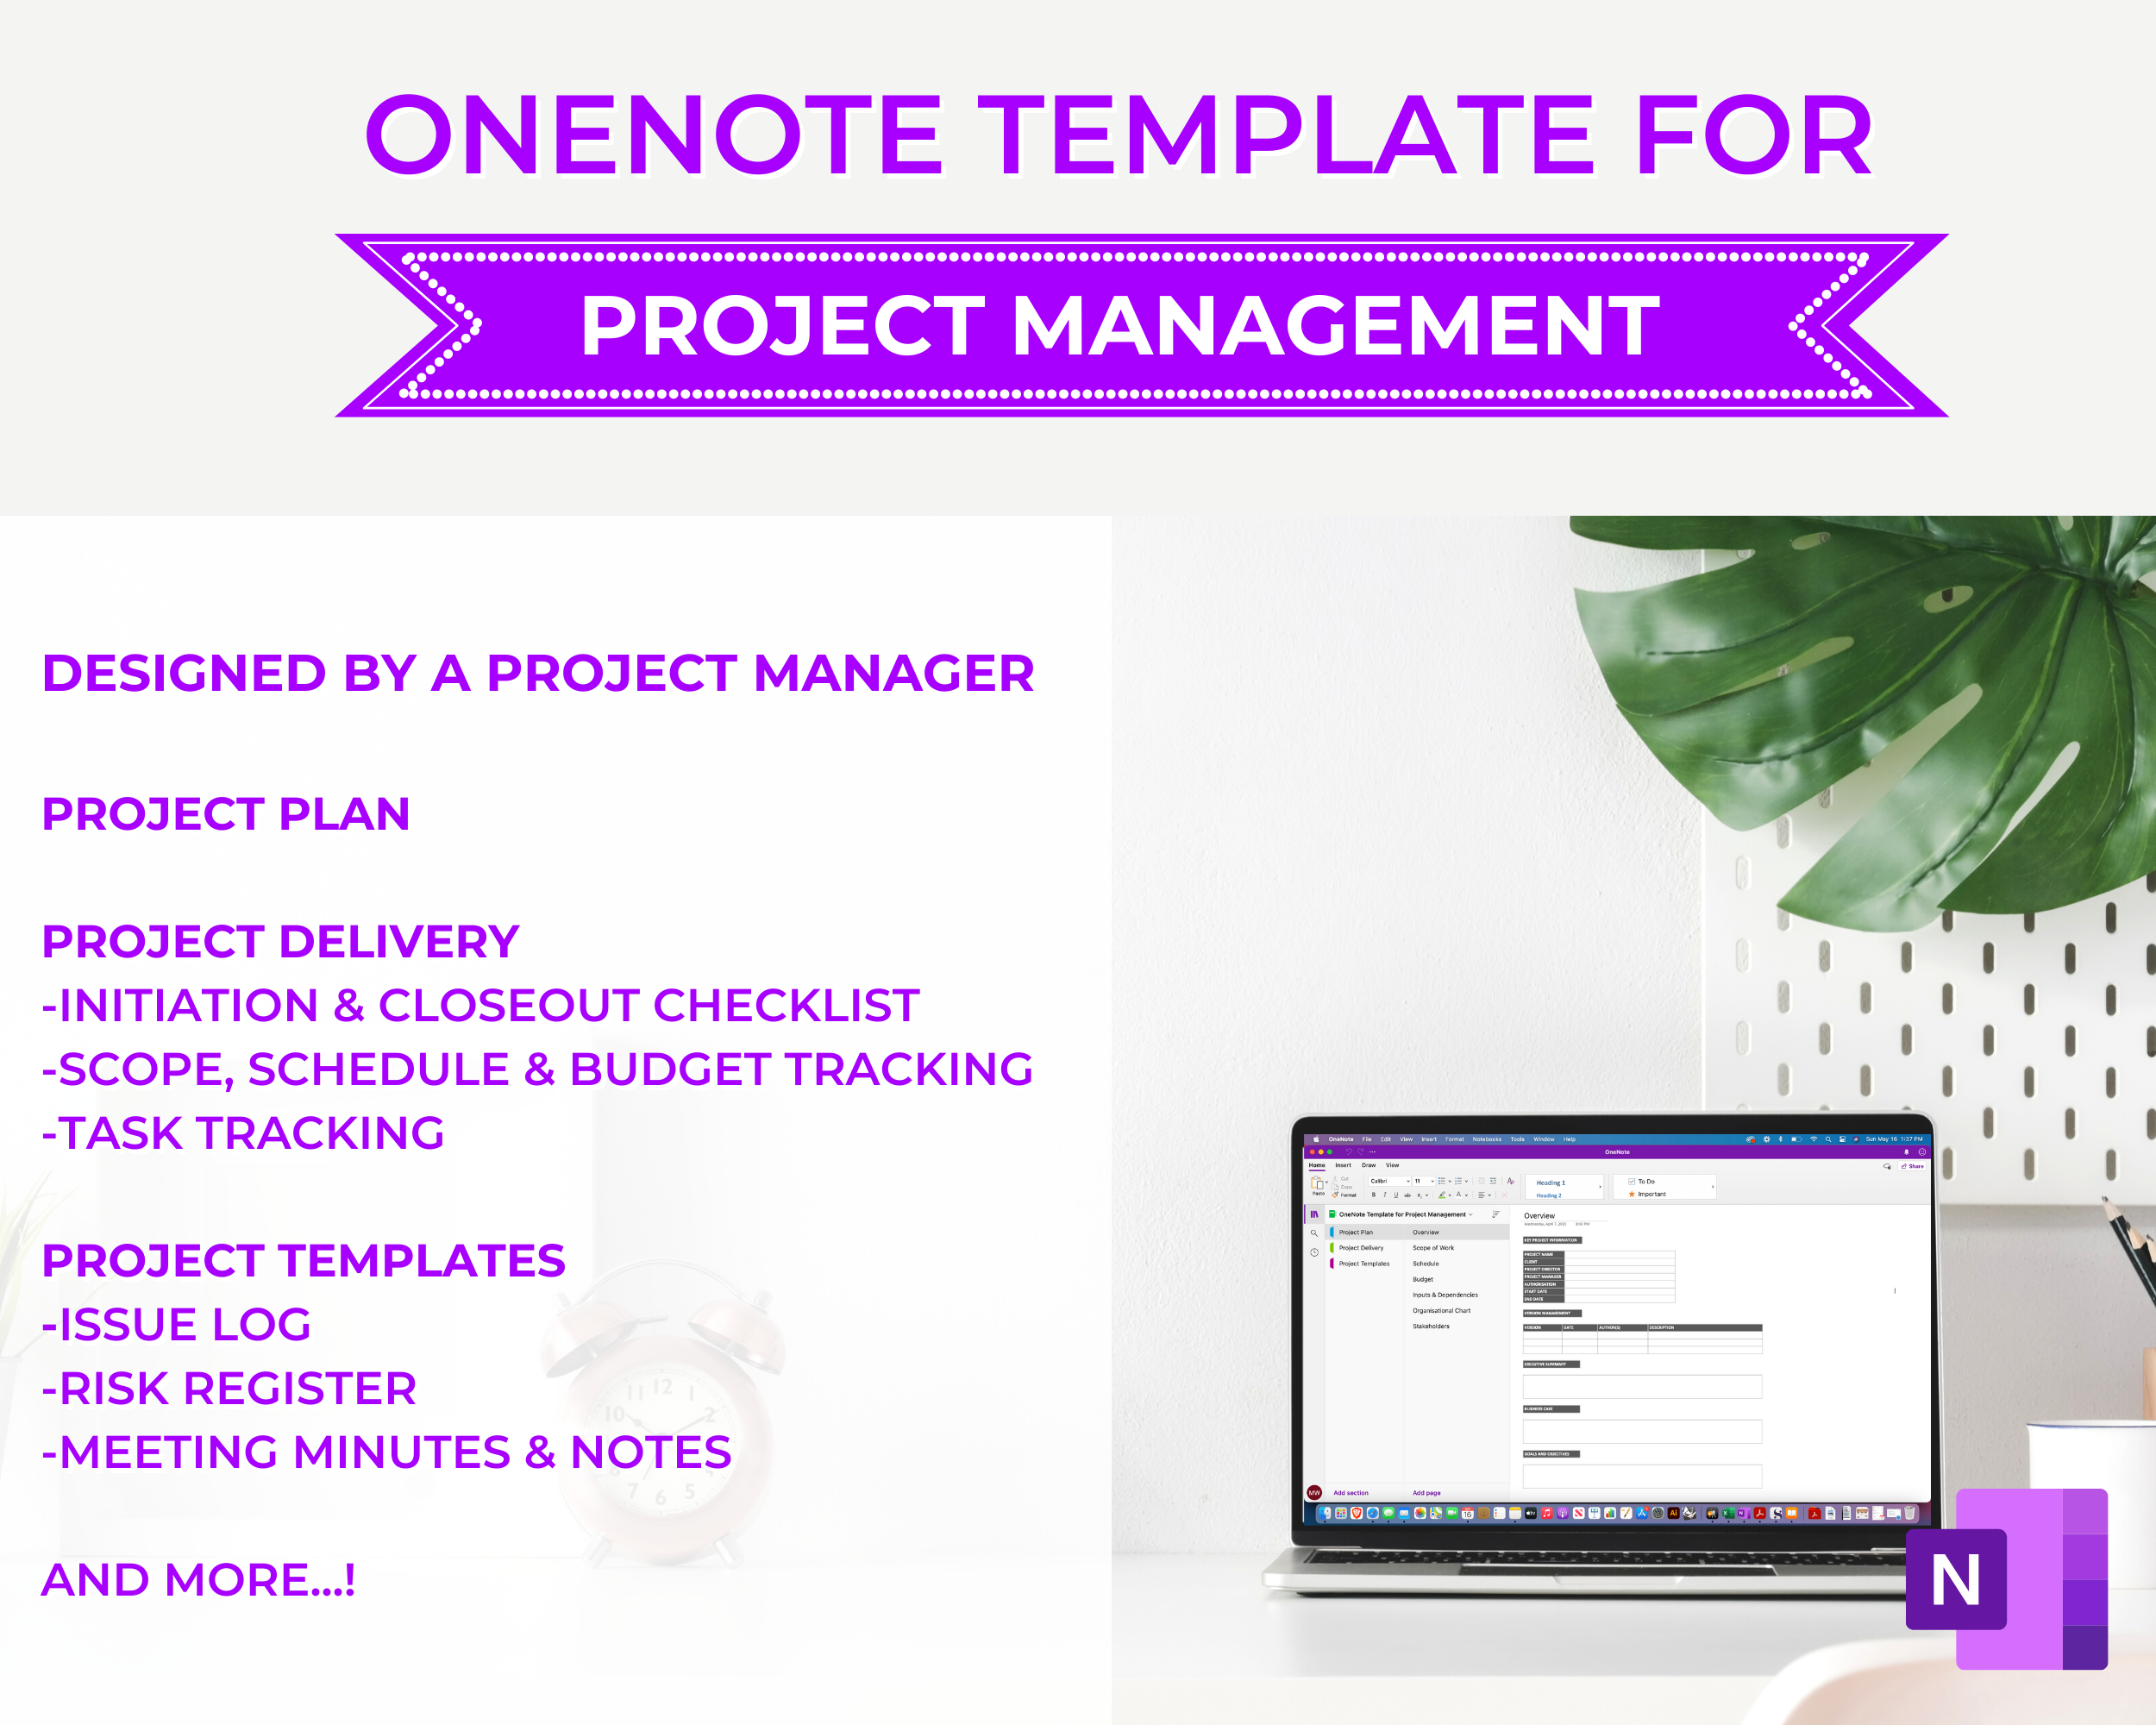 onenote-template-for-project-management-the-better-grind